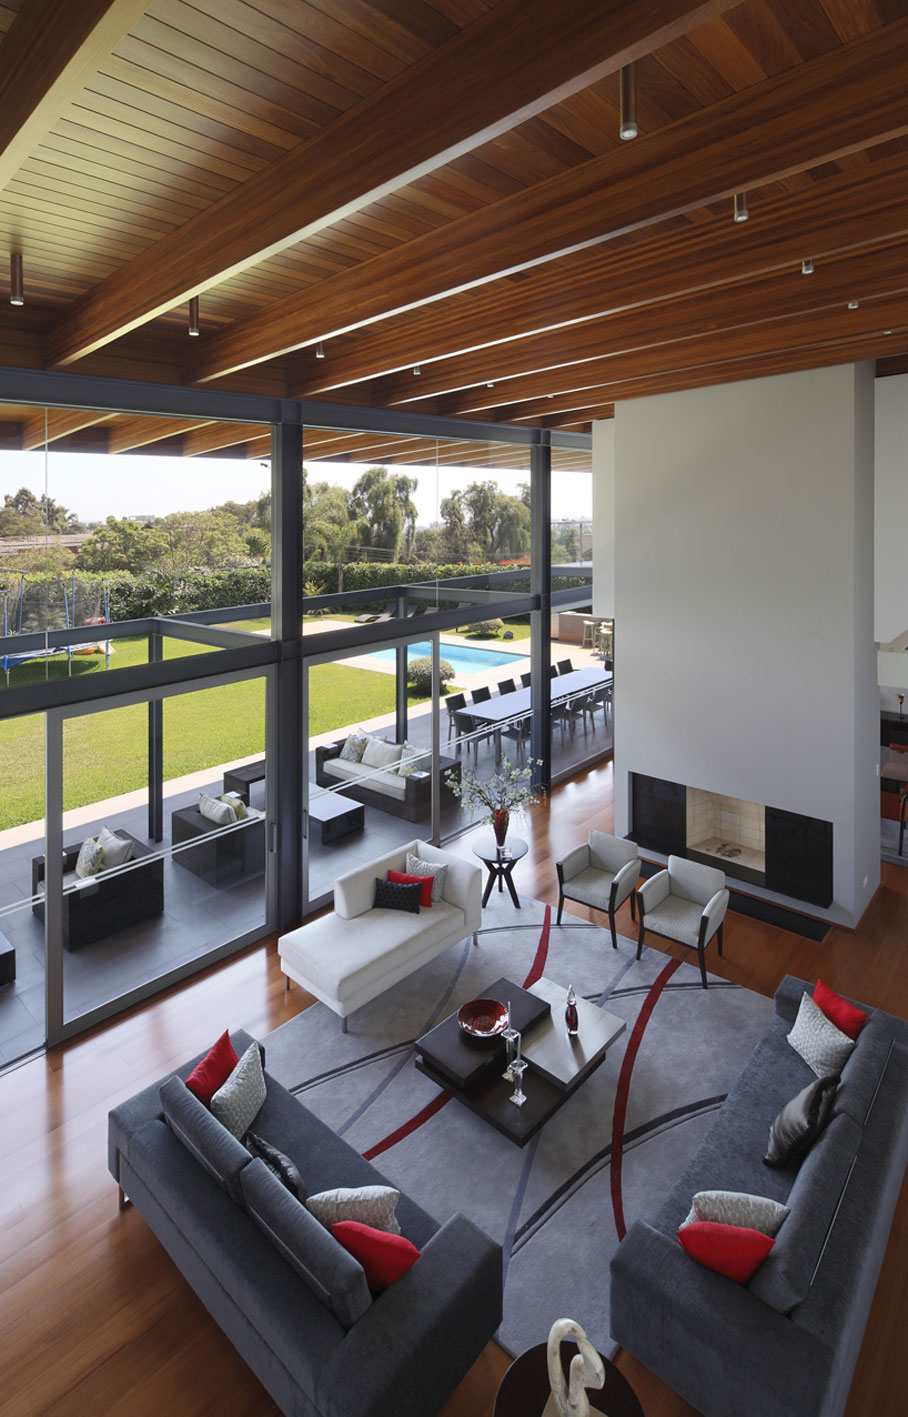 High Ceilings, Floor-to-Ceiling Windows, Fireplace, Sofas, Imposing Family Home in Lima, Peru